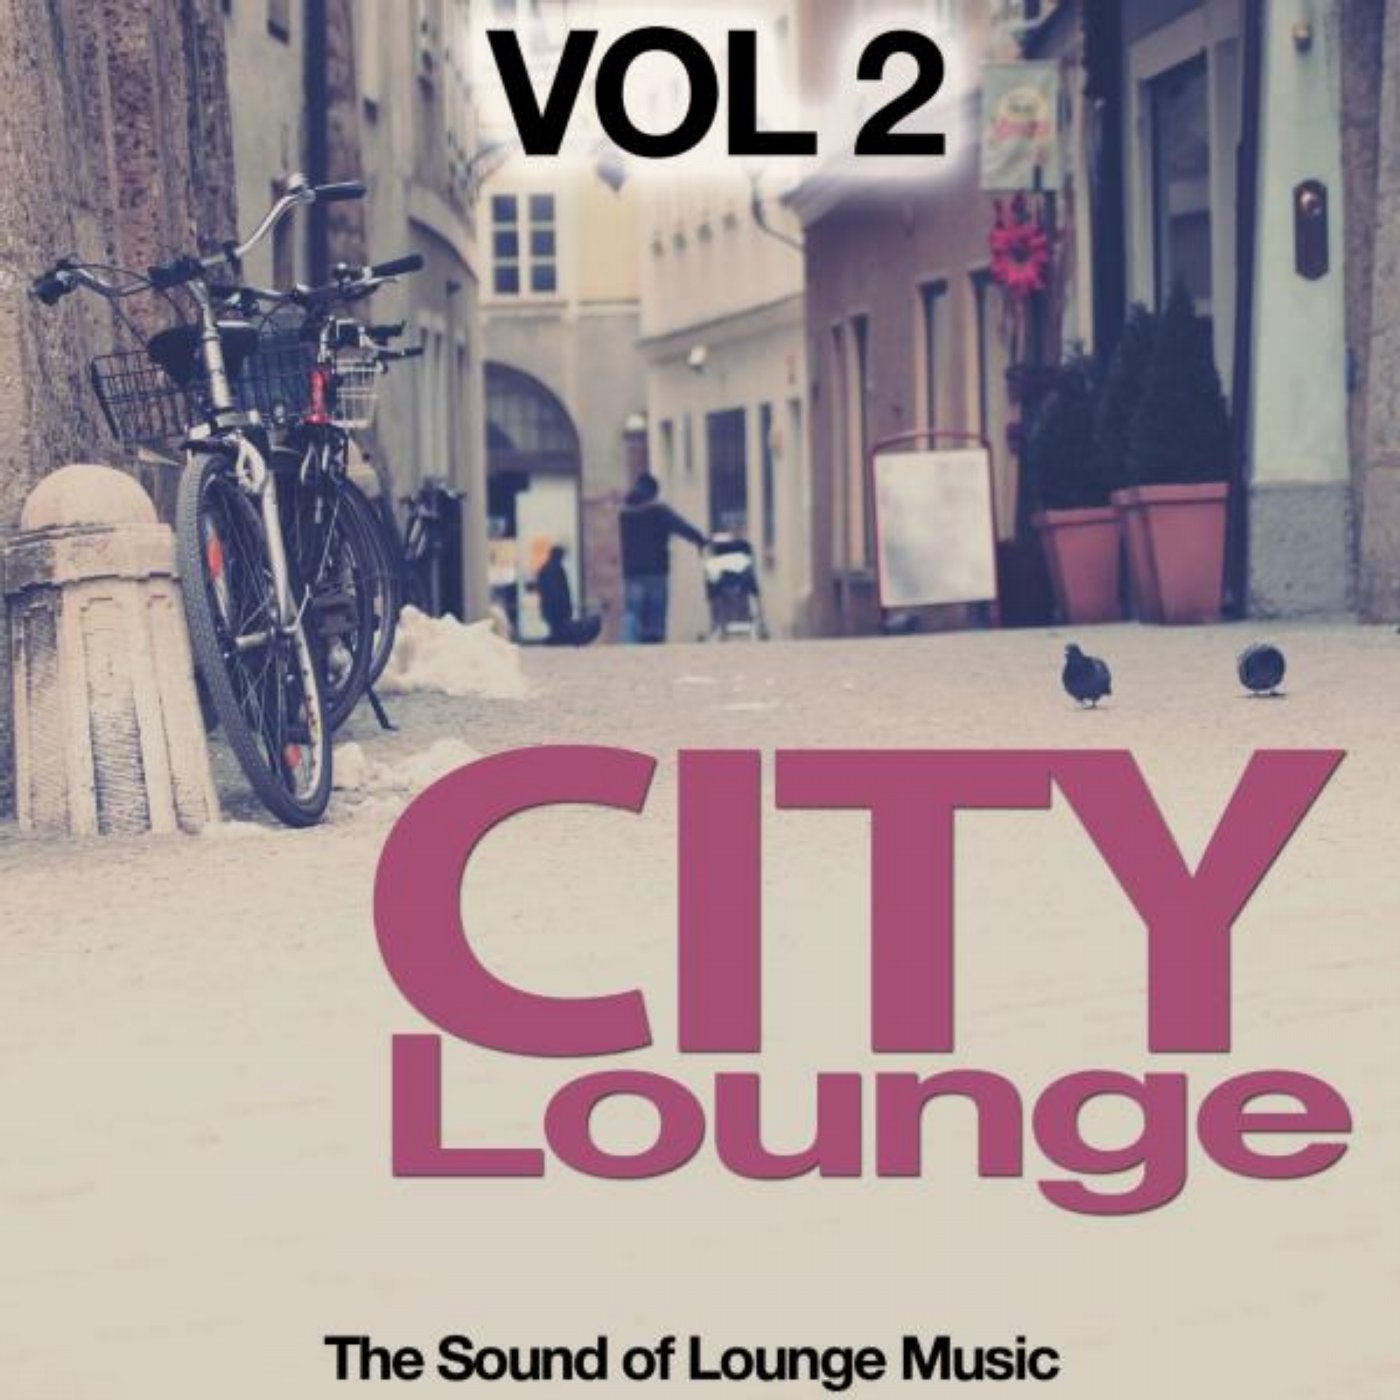 City Lounge, Vol. 2 (The Sound of Lounge Music)